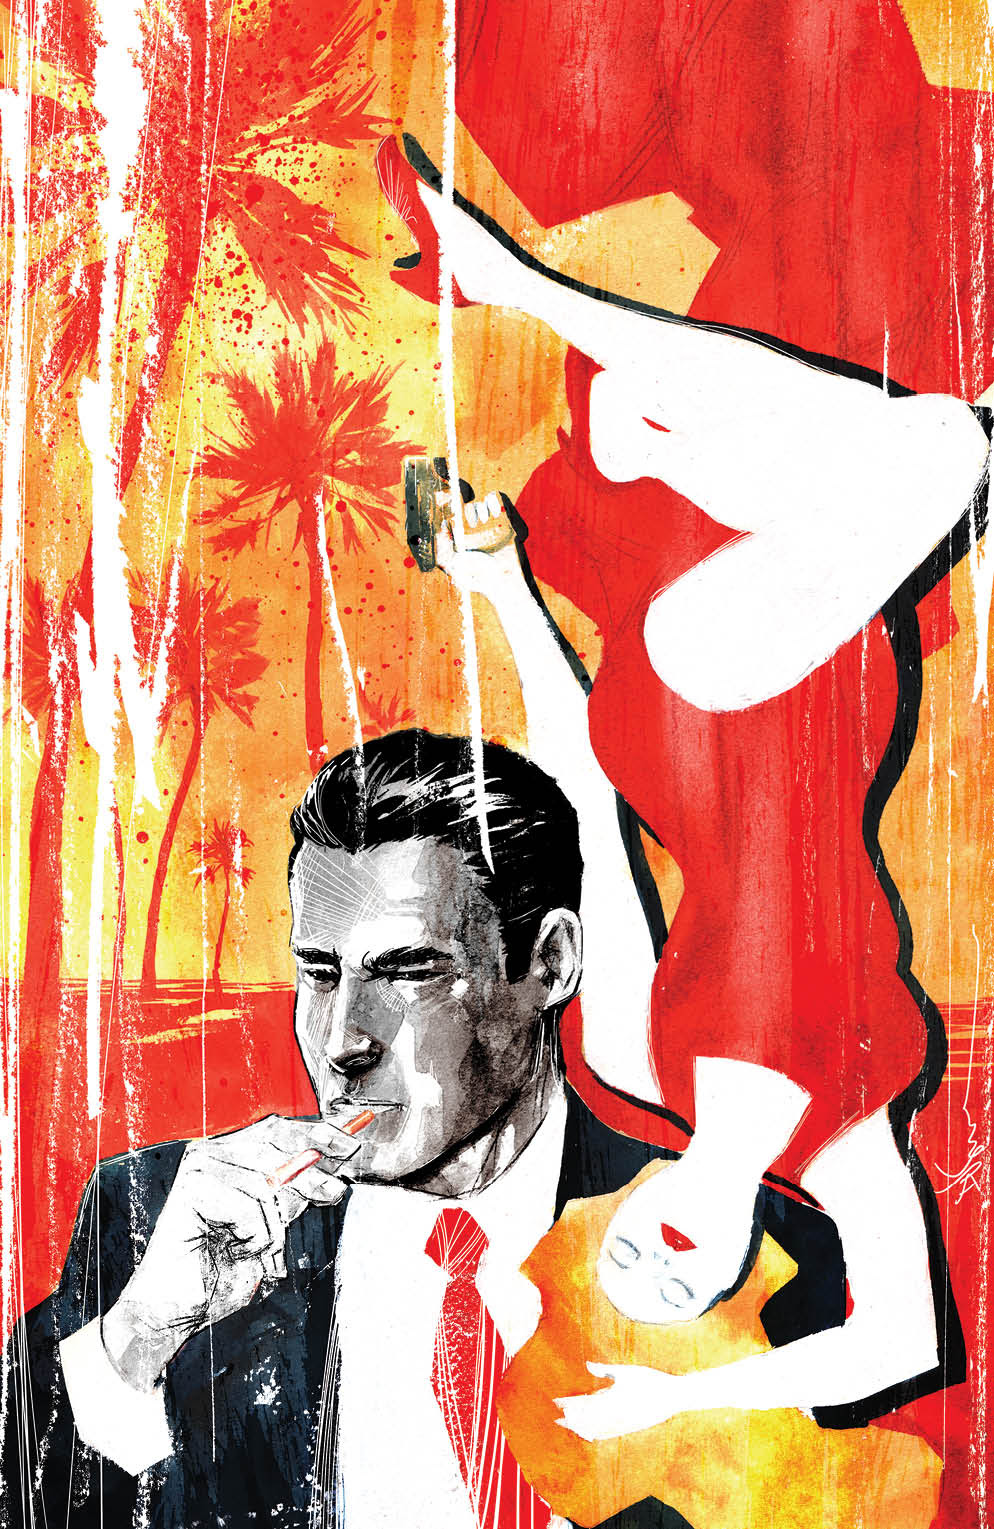 Hit: 1957 #1 Incentive Cover